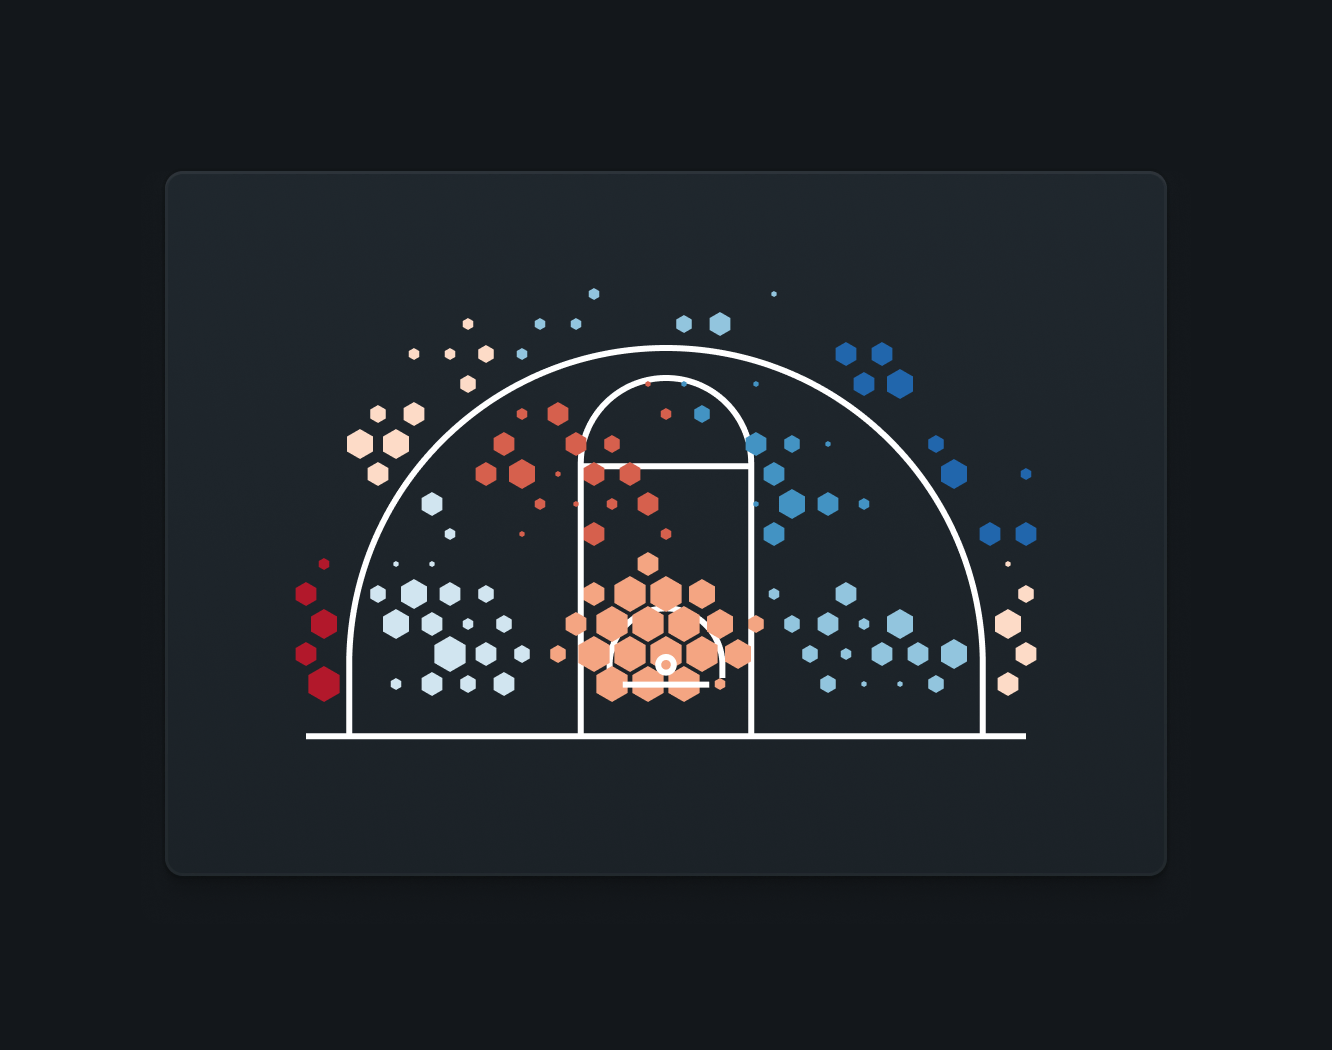 A shot chart for basketball shooting. It shows a basketball half-court, covered by various small hexagons of various sizes, in various colors such as red, blue, and tan in various shades.